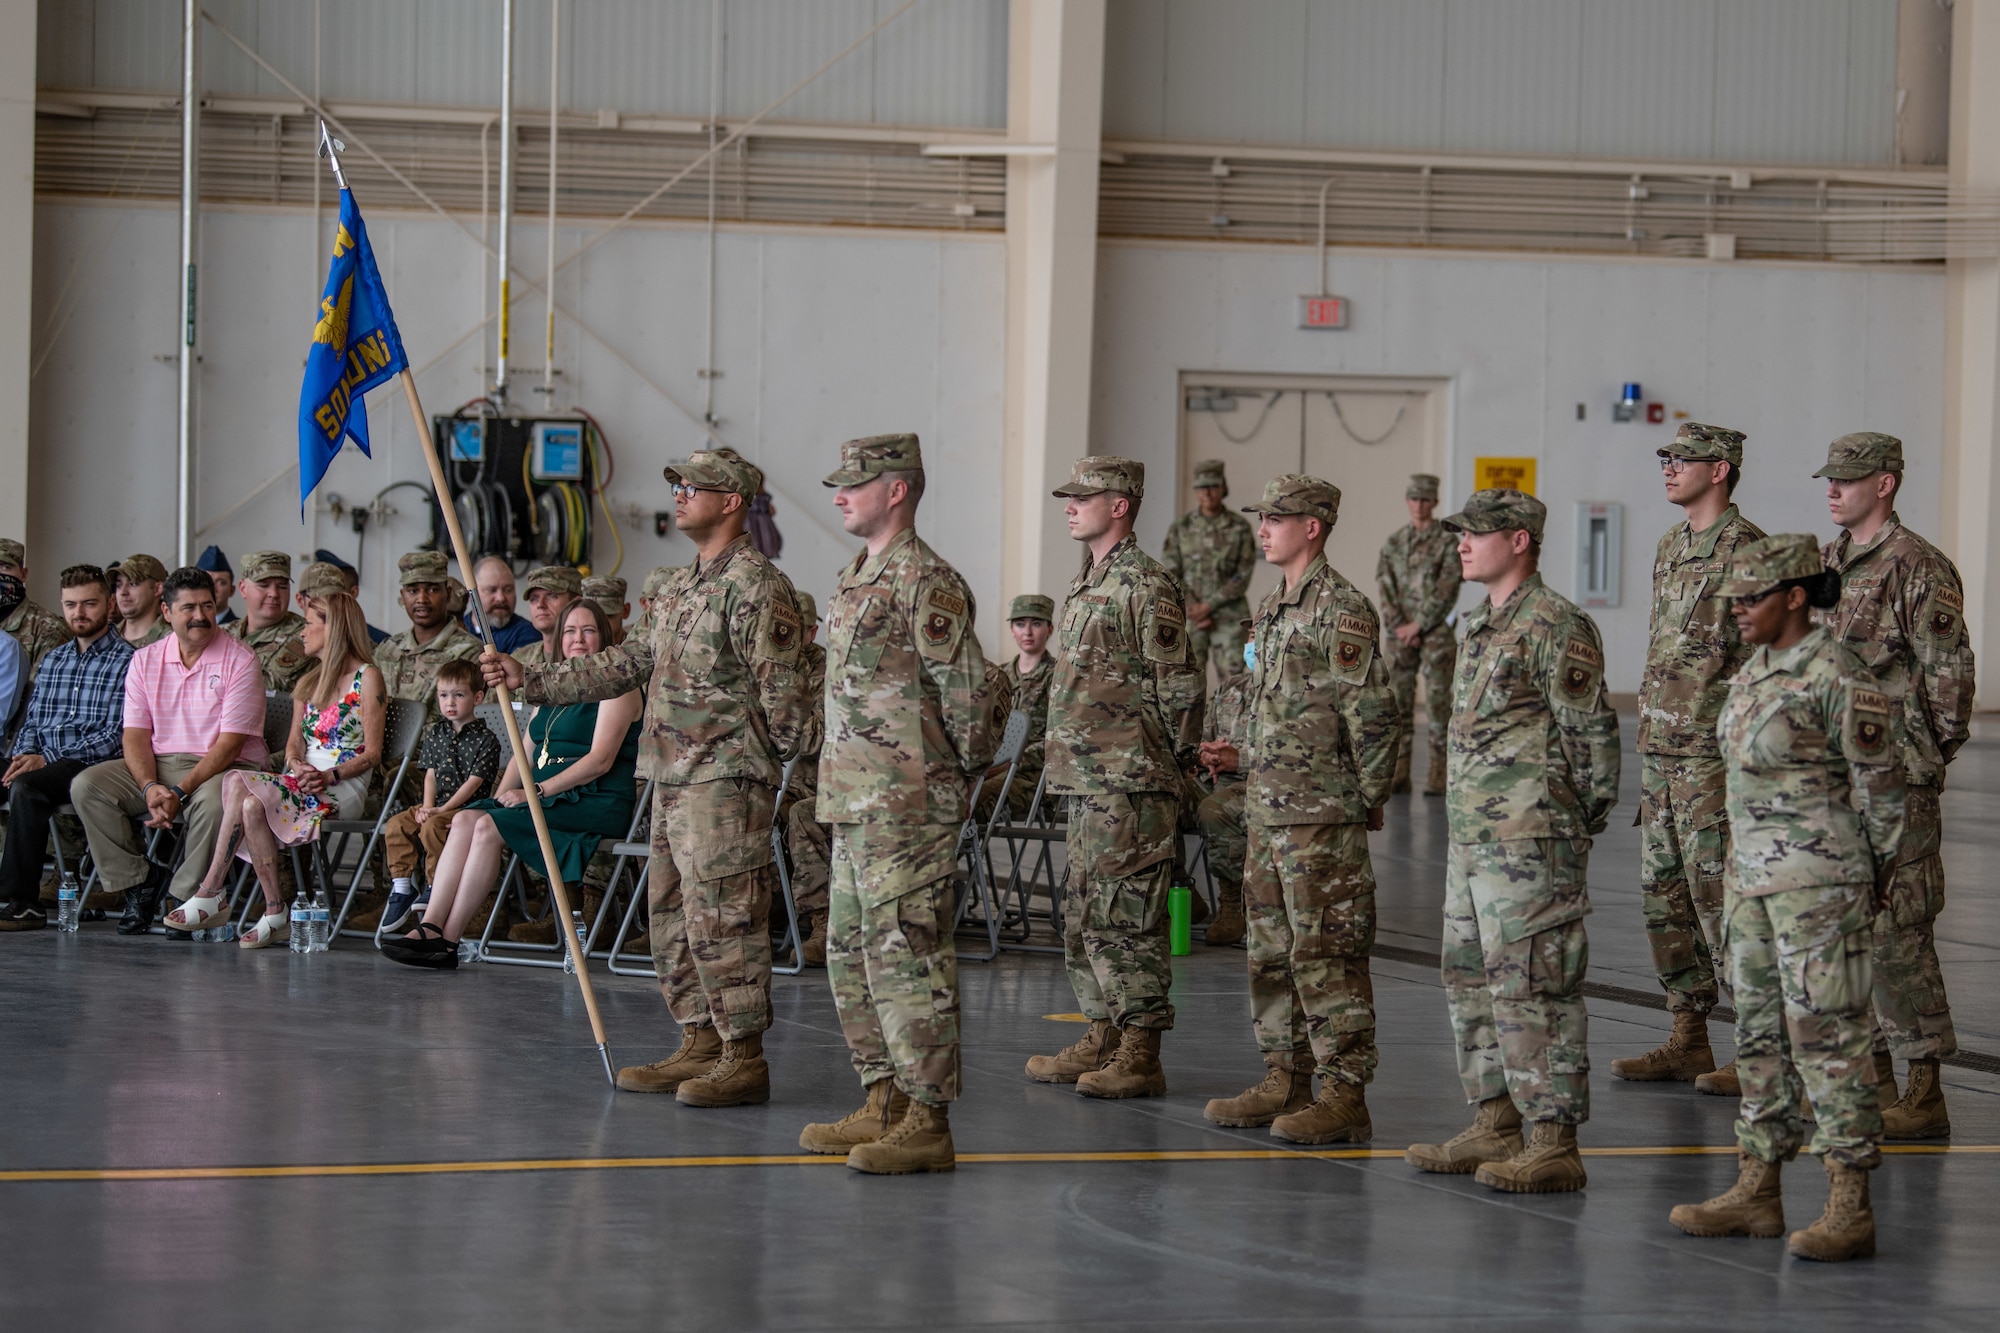 Members of the 27th Special Operations Munitions Squadron stand in formation for the 27 SOMUNS activation ceremony at Cannon Air Force Base, N.M., July 28, 2021. The 27 SOMUNS was activated recently to align with the Air Force Special Operations Command's strategic focus. (U.S. Air Force photo by Senior Airman Marcel D. Williams)